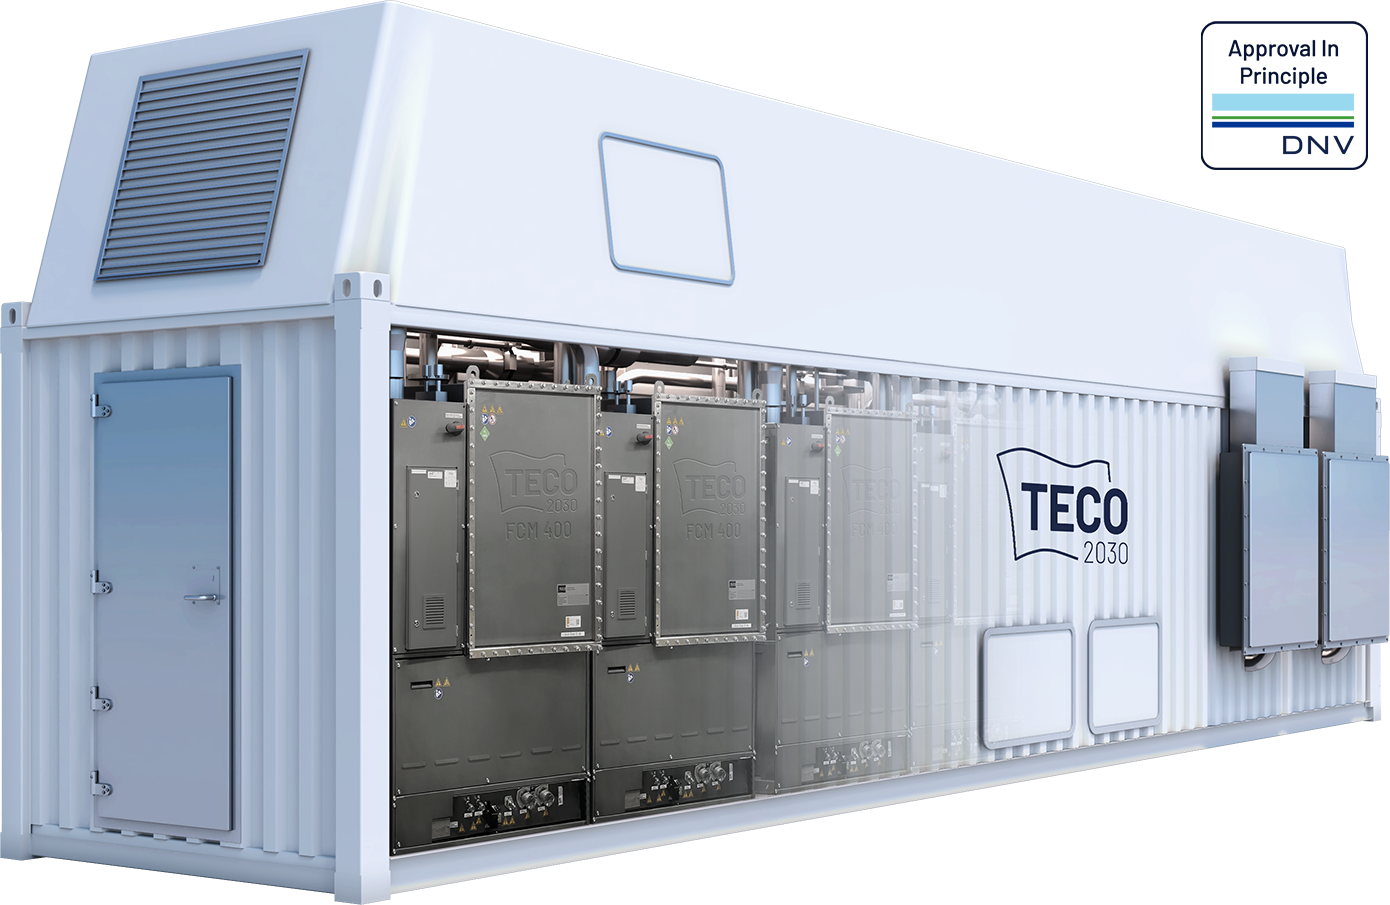 An illustration of a TECO 2030 fuel cell power generator.